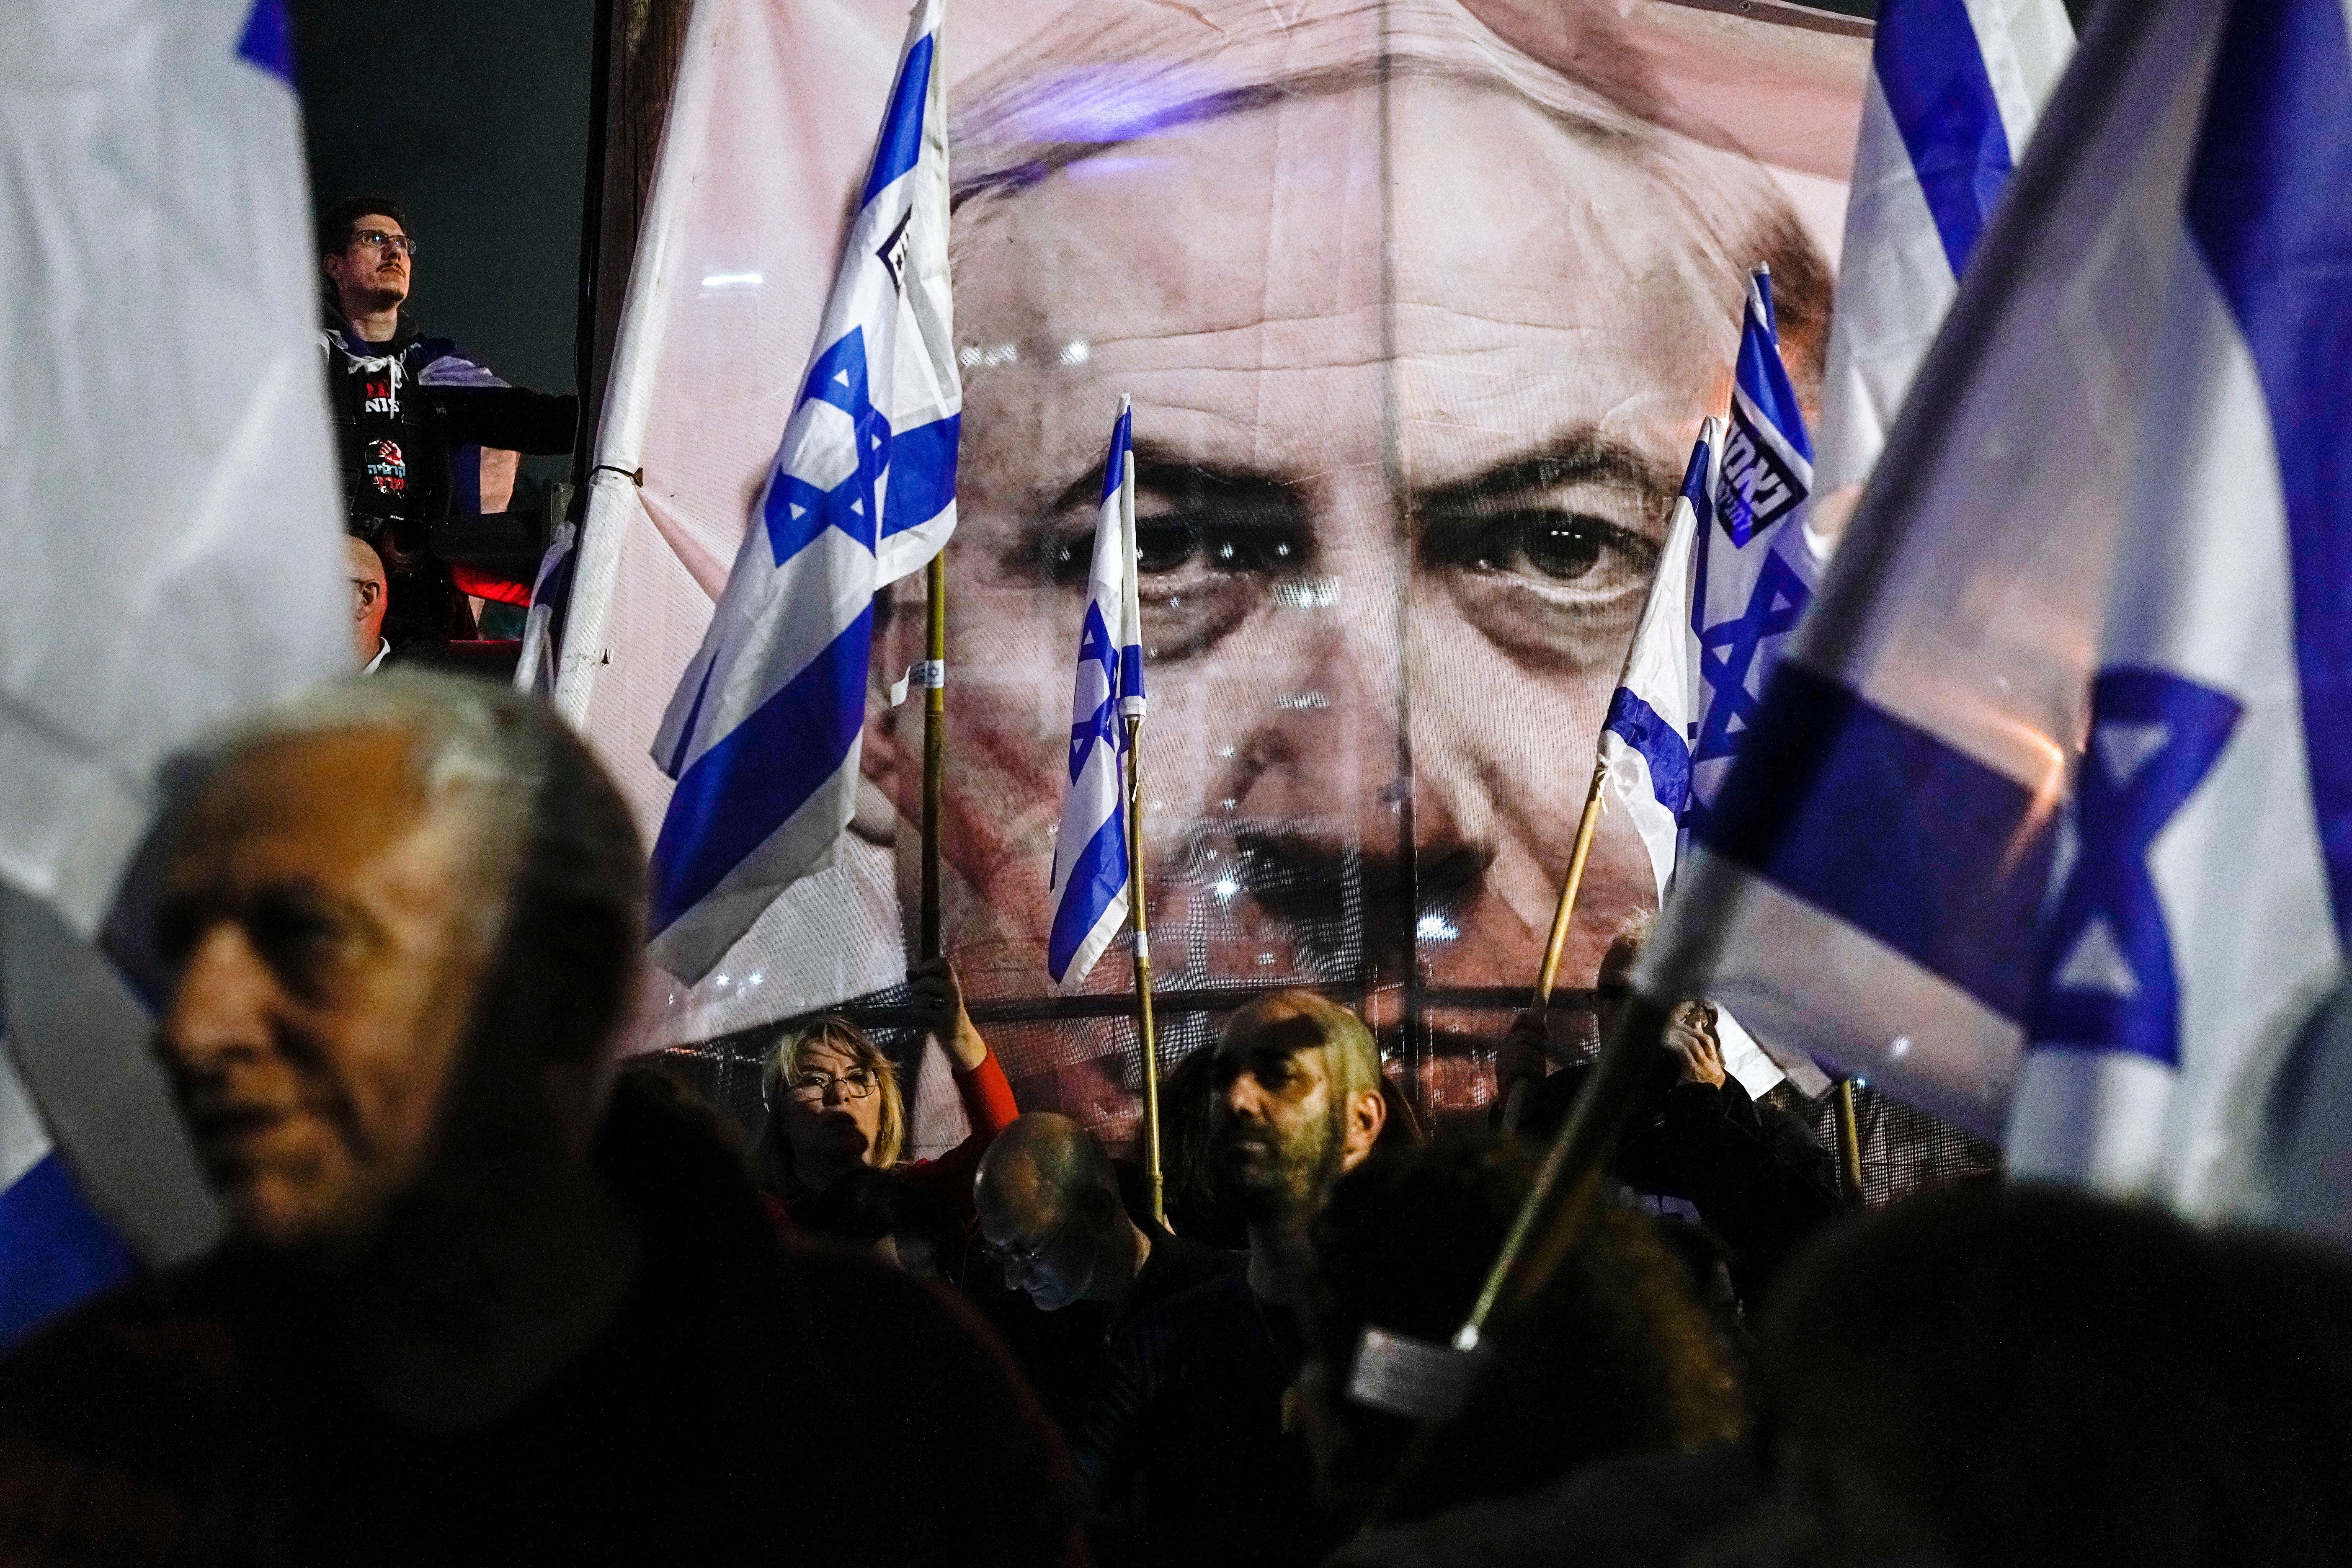 Protests against Netanyahu have gone on for days